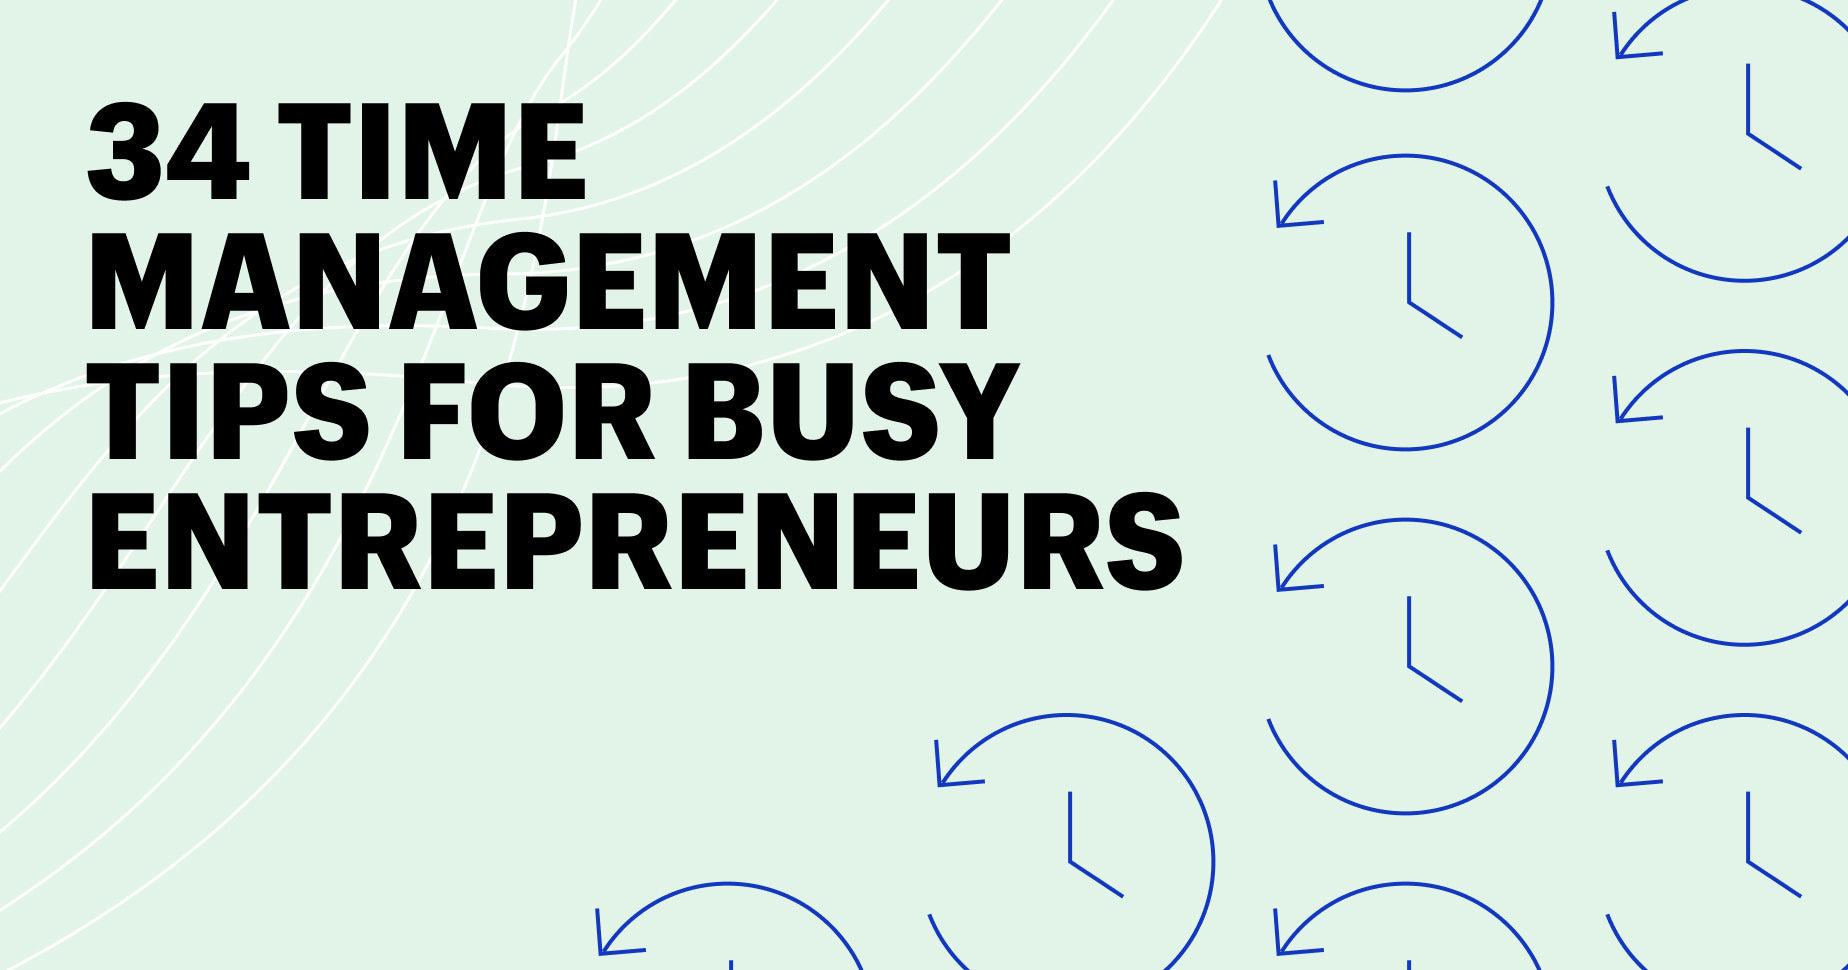 Image visual that says "Time Management tips for busy entrepreneurs"